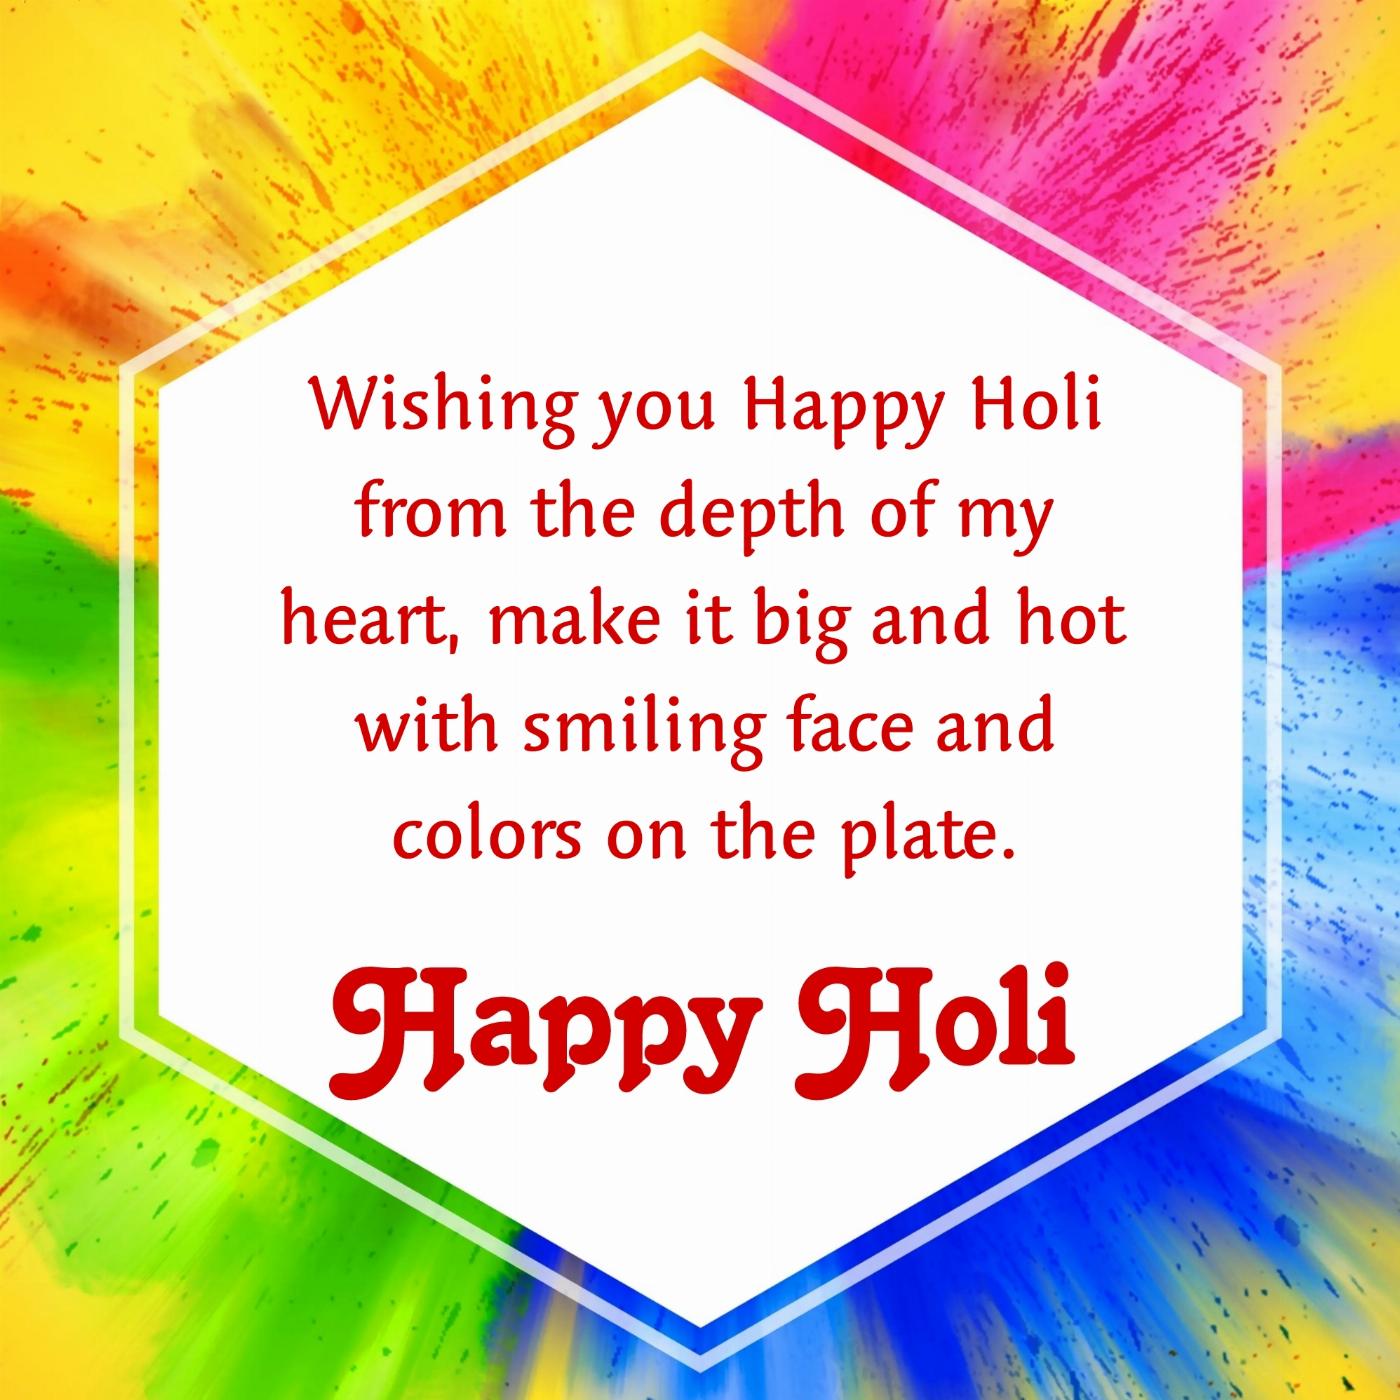 Wishing you Happy Holi from the depth of my heart make it big